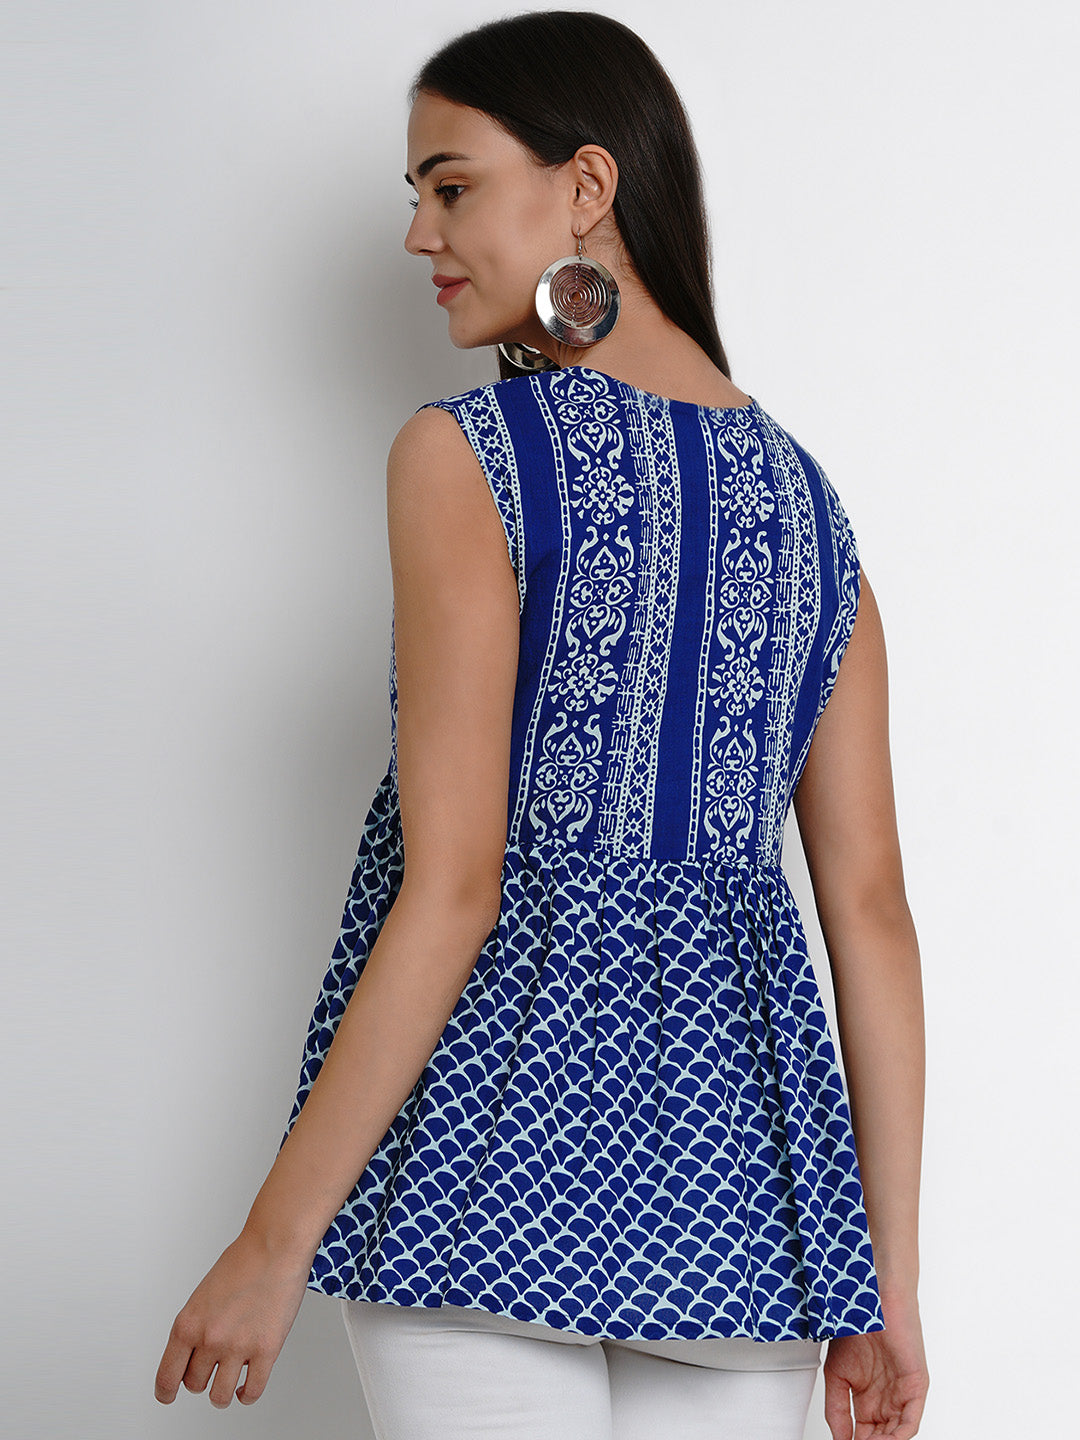 Bhama Couture Blue & White Printed Top